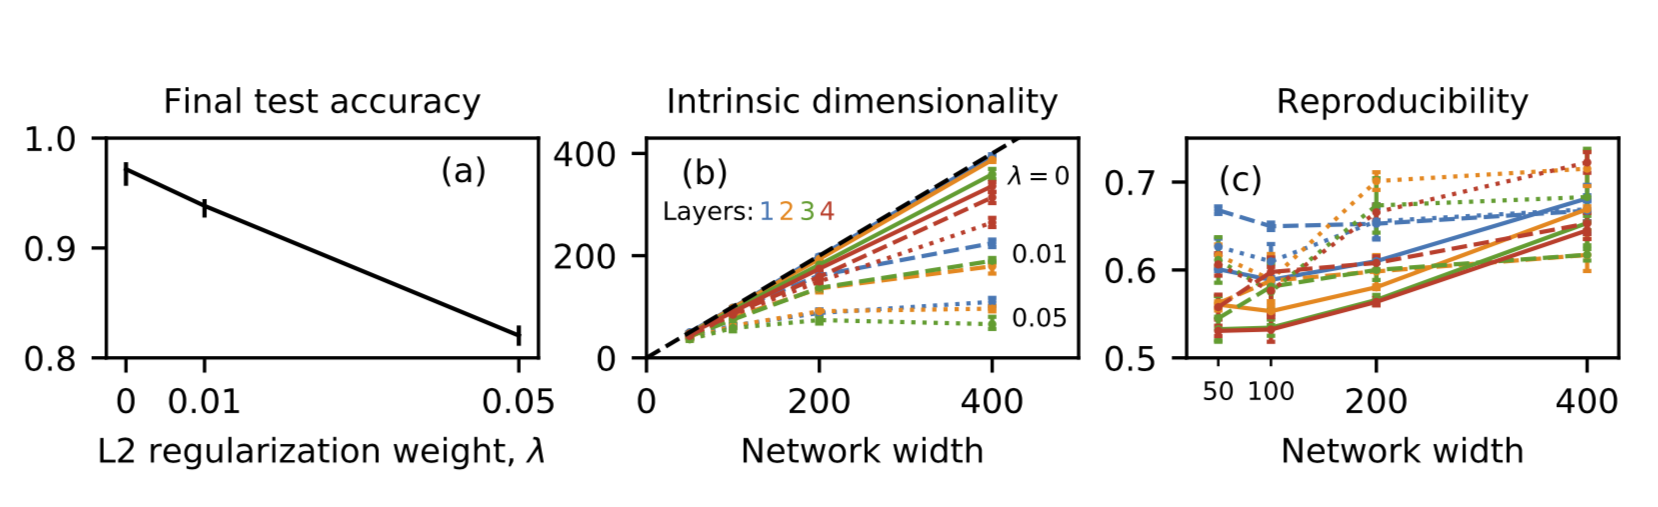 Test accuracies, intrinsic dimensionalities and reproducibilities of networks trained on the MNIST dataset for various L2 regularization weights $\lambda$ and network widths. The error bars in (a) and (b) show maxima and minima; those in (c) show the estimated standard error.